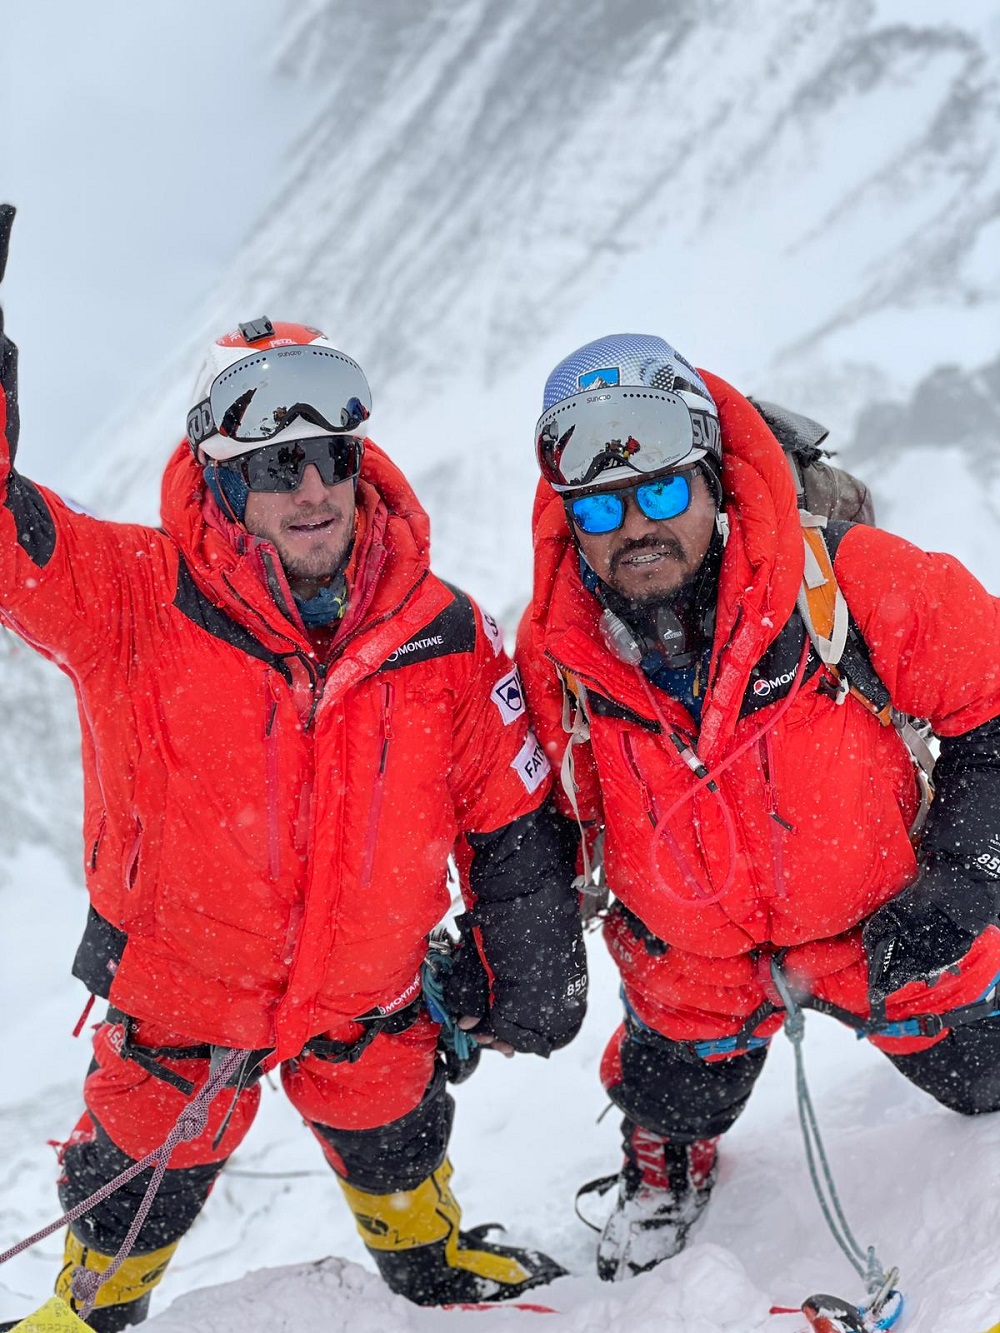 "In Nepal, I'll always partner with Lhakpa Wongchu, Sherpa and 14-time Everest summiter from Pangboche. A true friend and legend!"